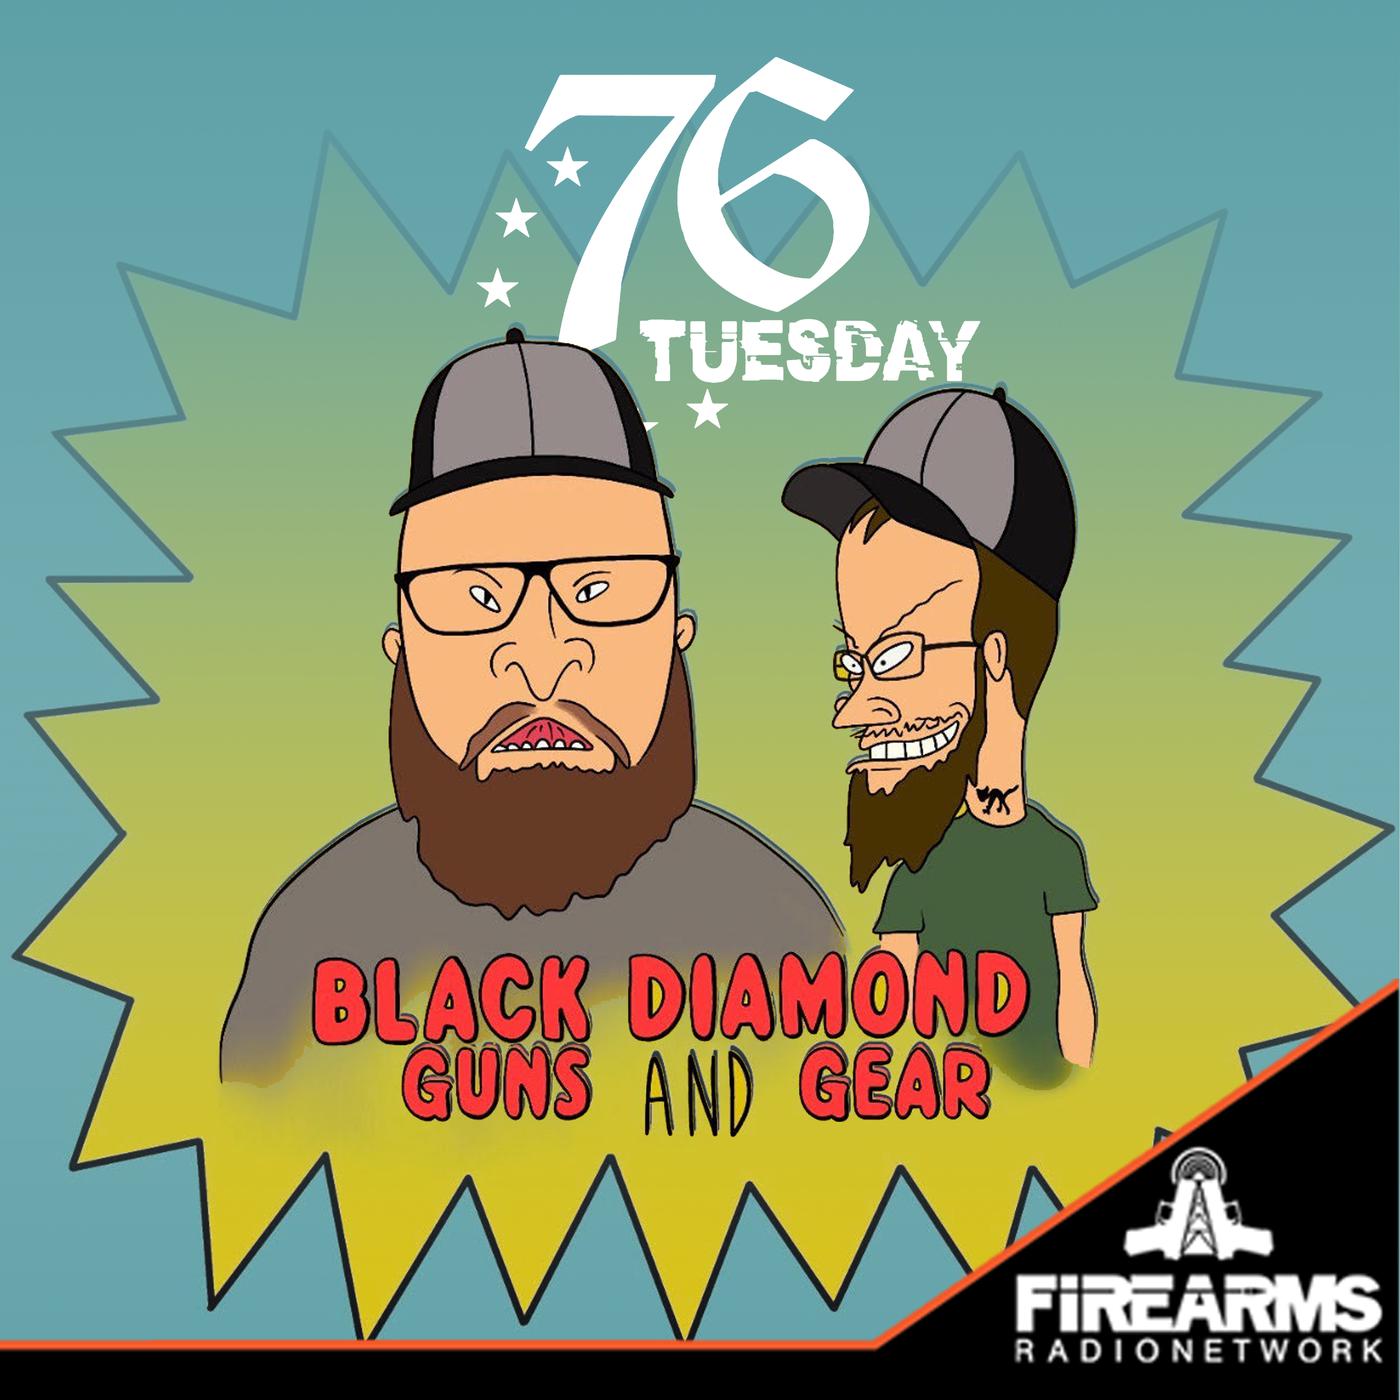 TFB Podcast Roundup 40: Talking with TFB's Vlad, and CCW Gun Choices 